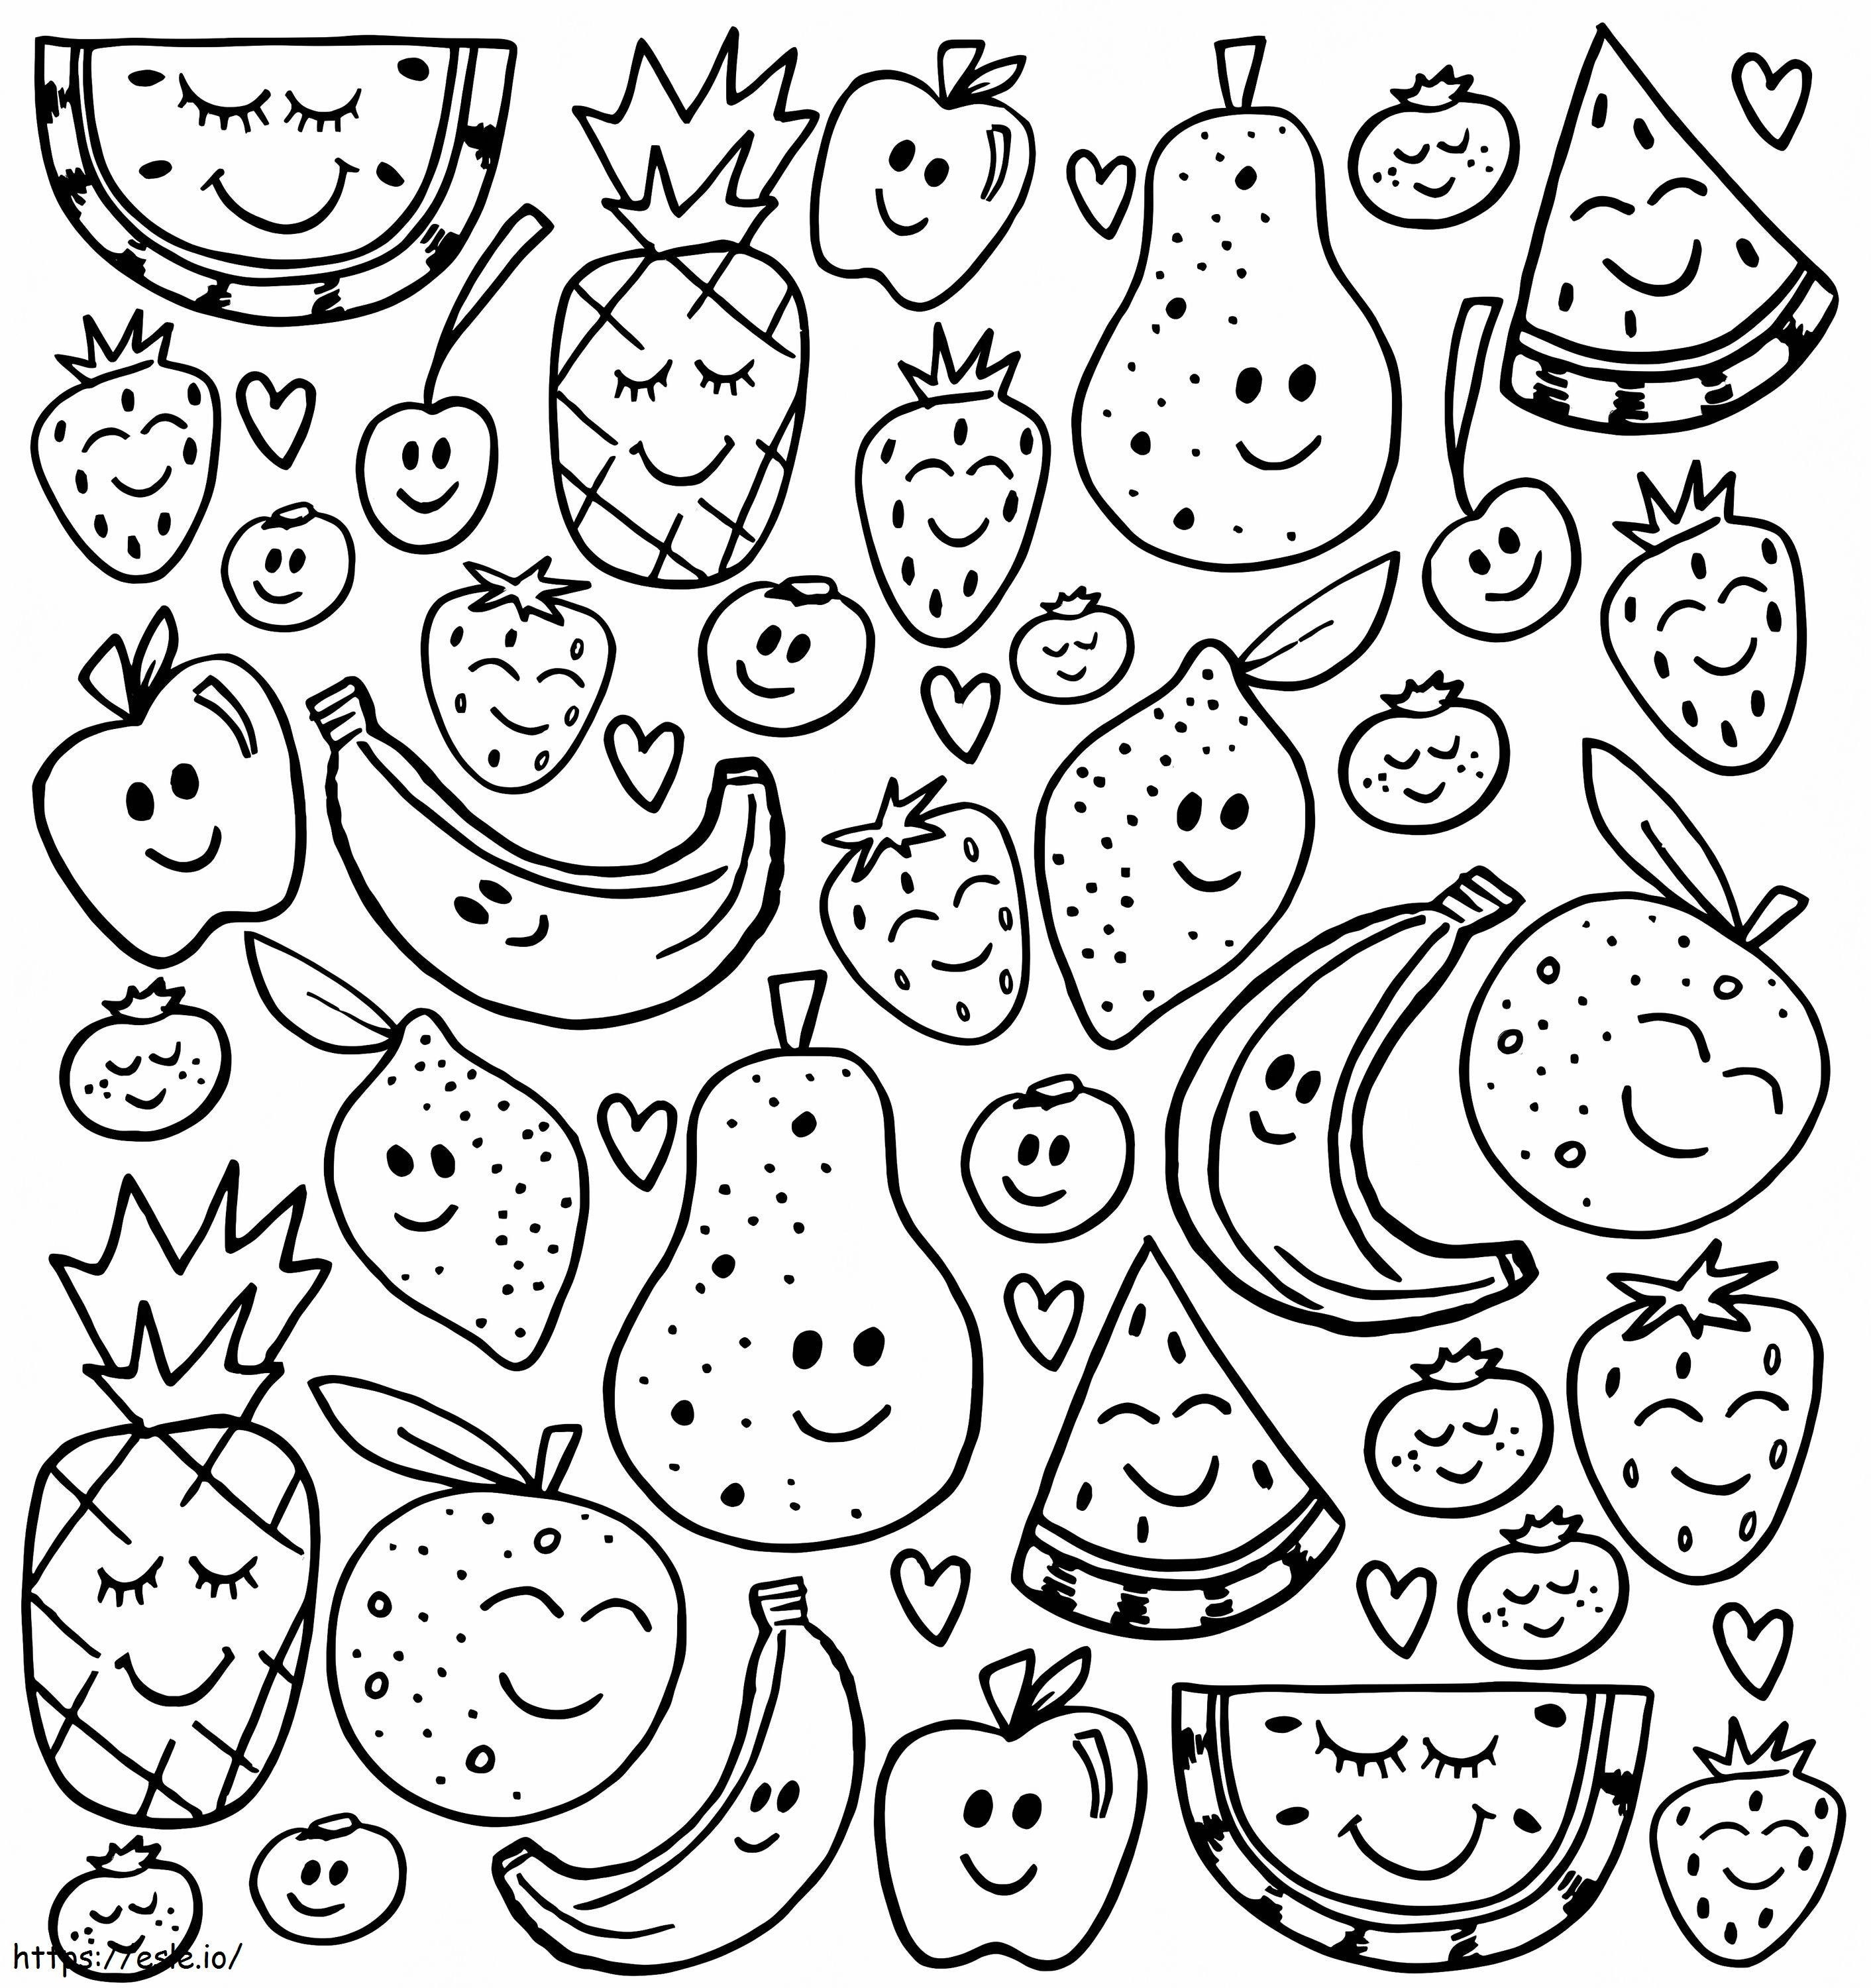 Printable Fruits coloring page